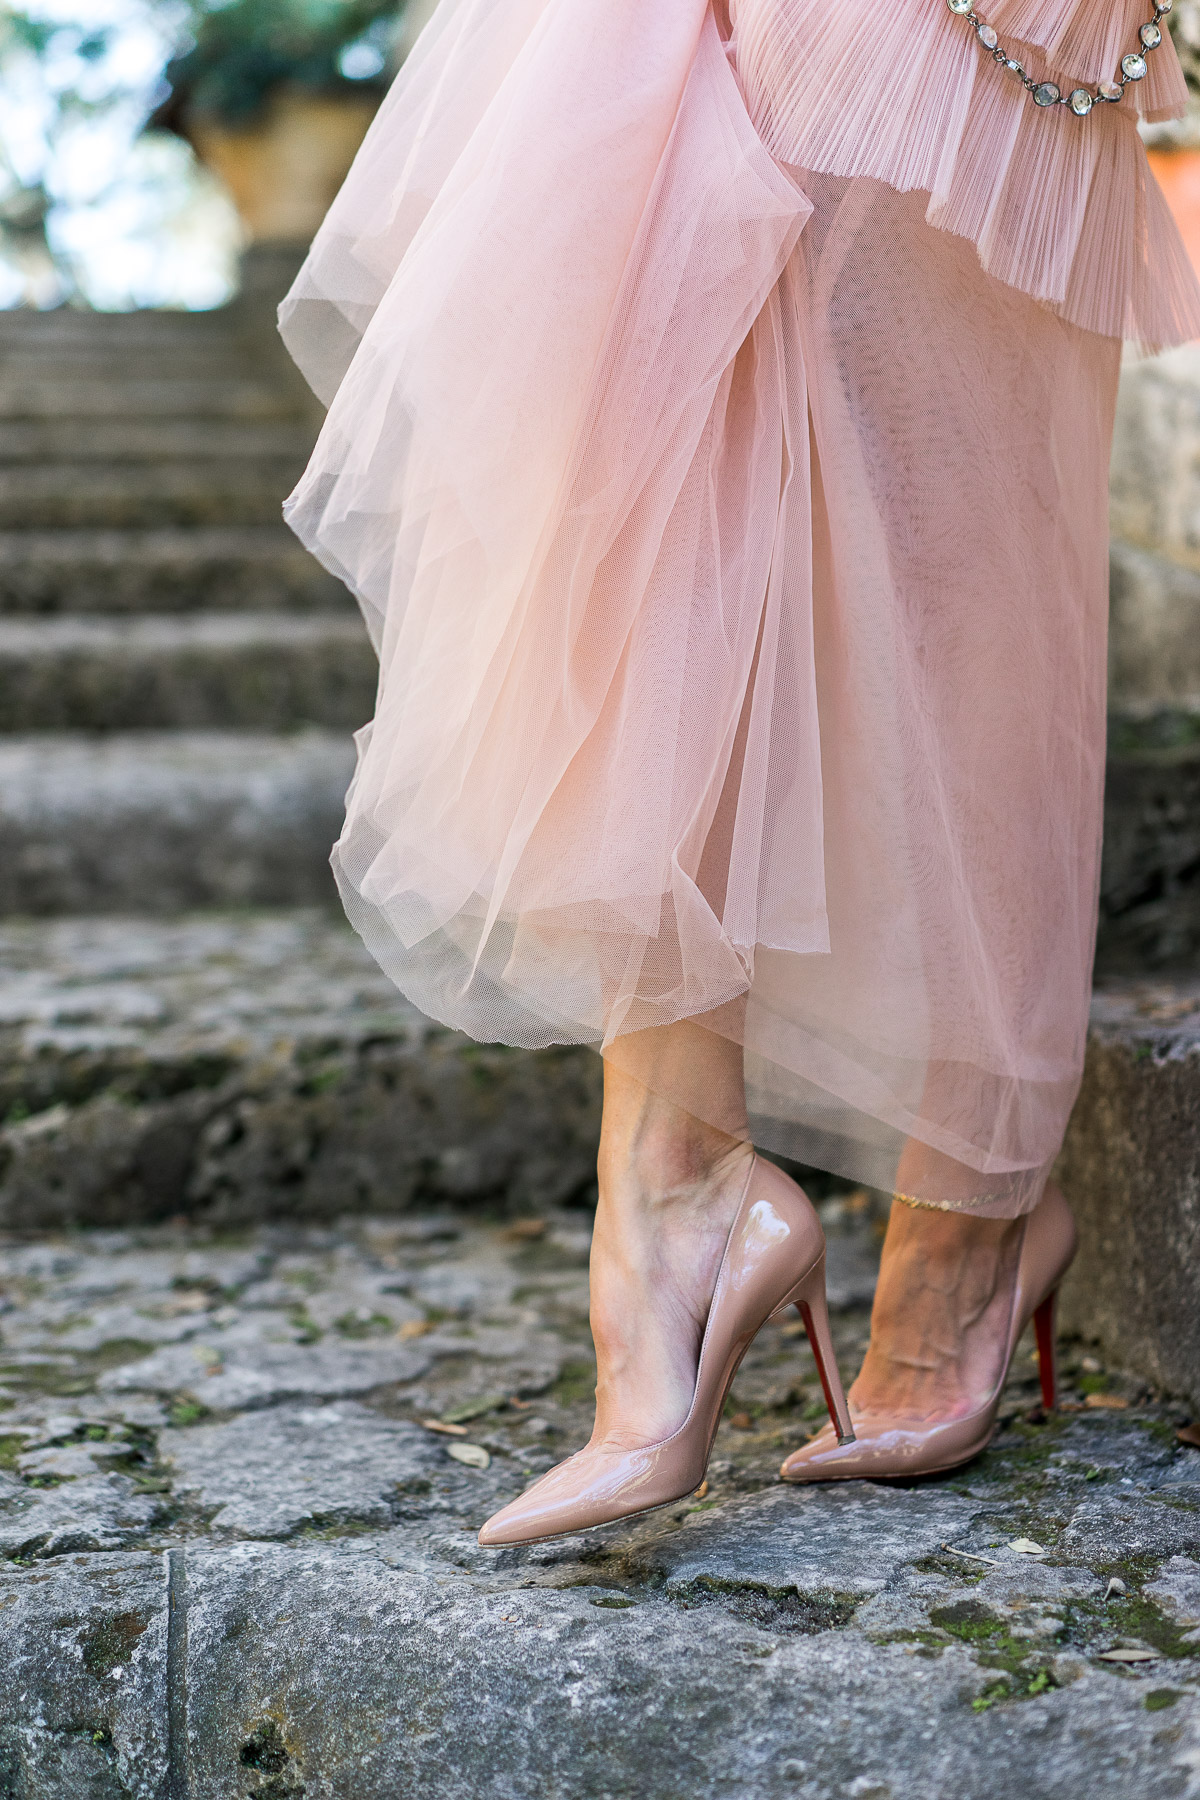 Amanda from A Glam Lifestyle blog wears Christian Louboutin nude Pigalle pumps with BCBG blush tulle dress at Viscaya in Miami